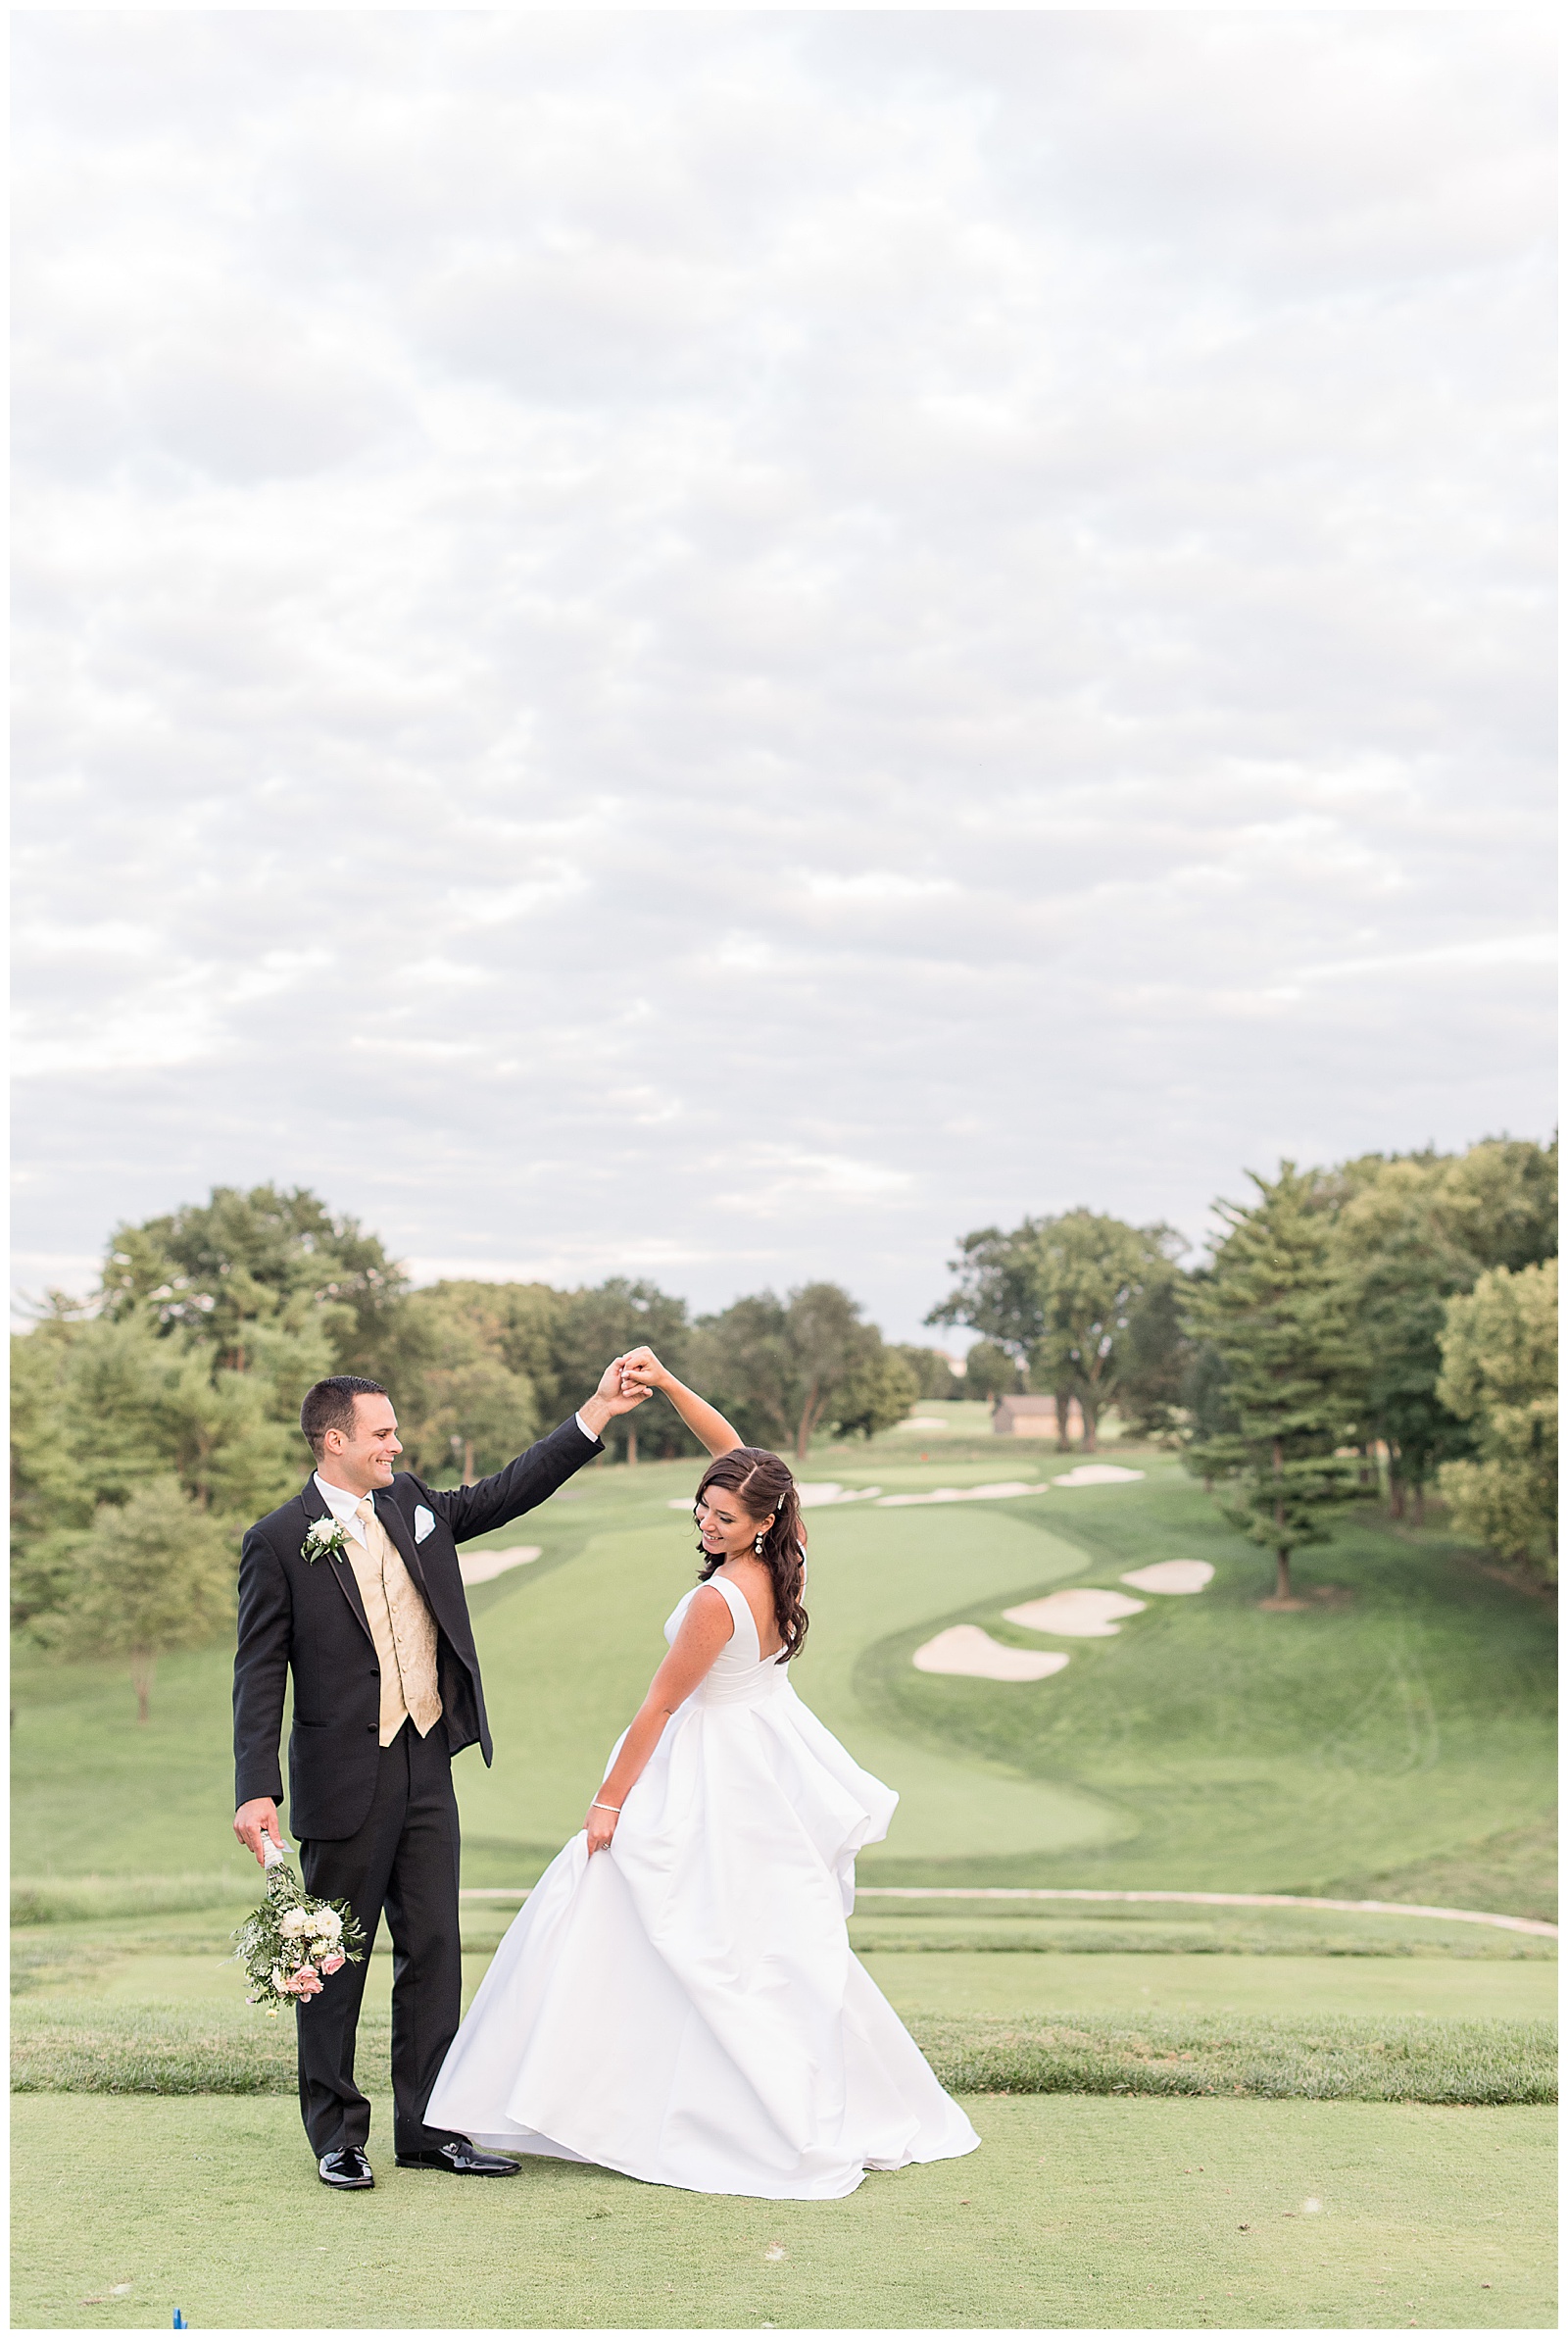 groom twirling bride on golf green overlooking golf course